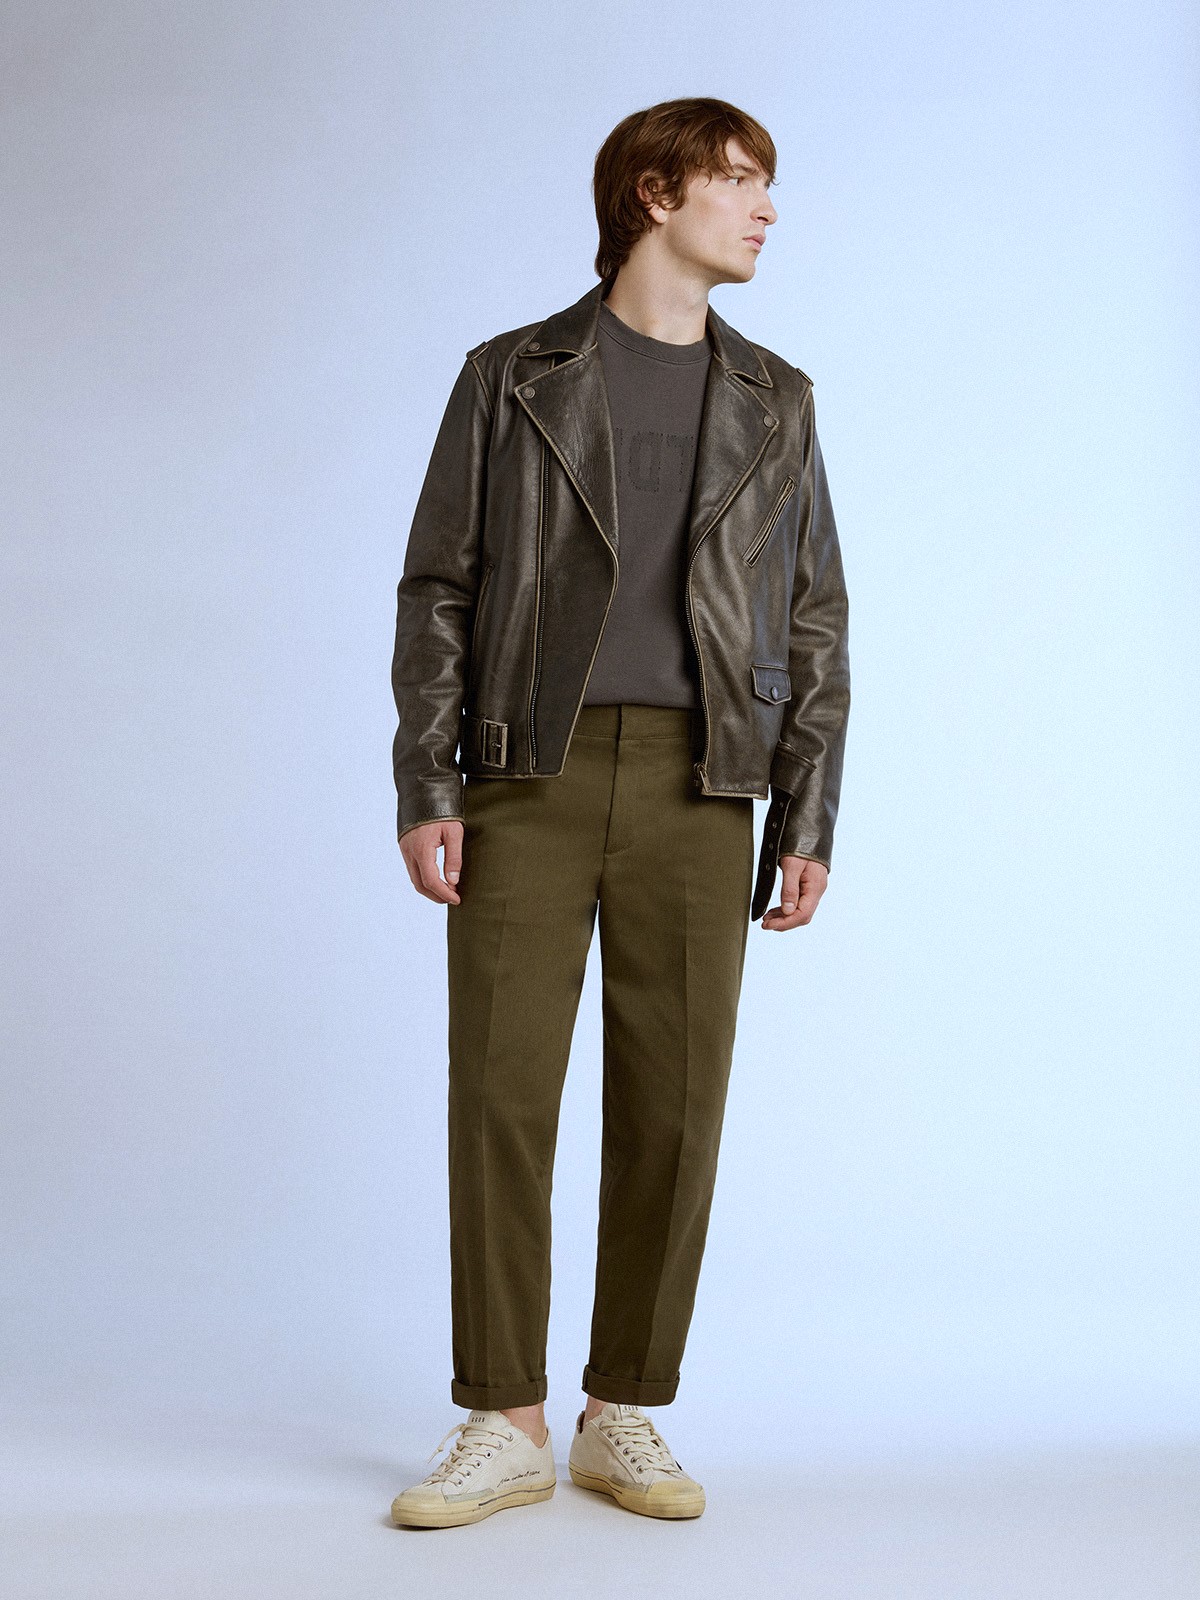 GOLDEN GOOSE Chino Skate Pants in Olive 52